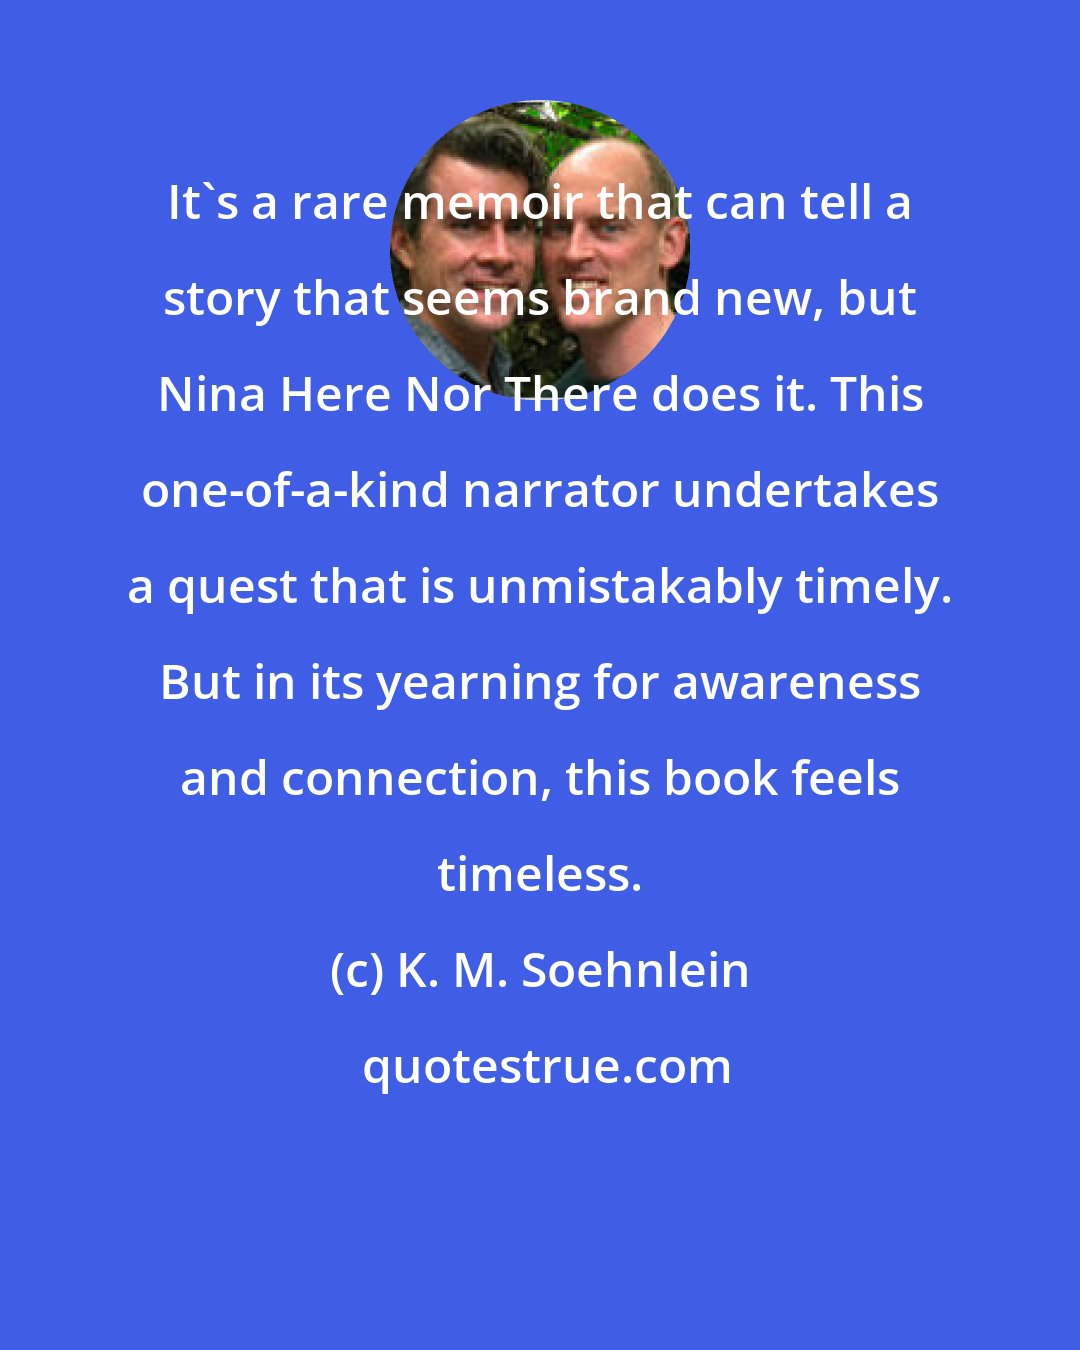 K. M. Soehnlein: It's a rare memoir that can tell a story that seems brand new, but Nina Here Nor There does it. This one-of-a-kind narrator undertakes a quest that is unmistakably timely. But in its yearning for awareness and connection, this book feels timeless.